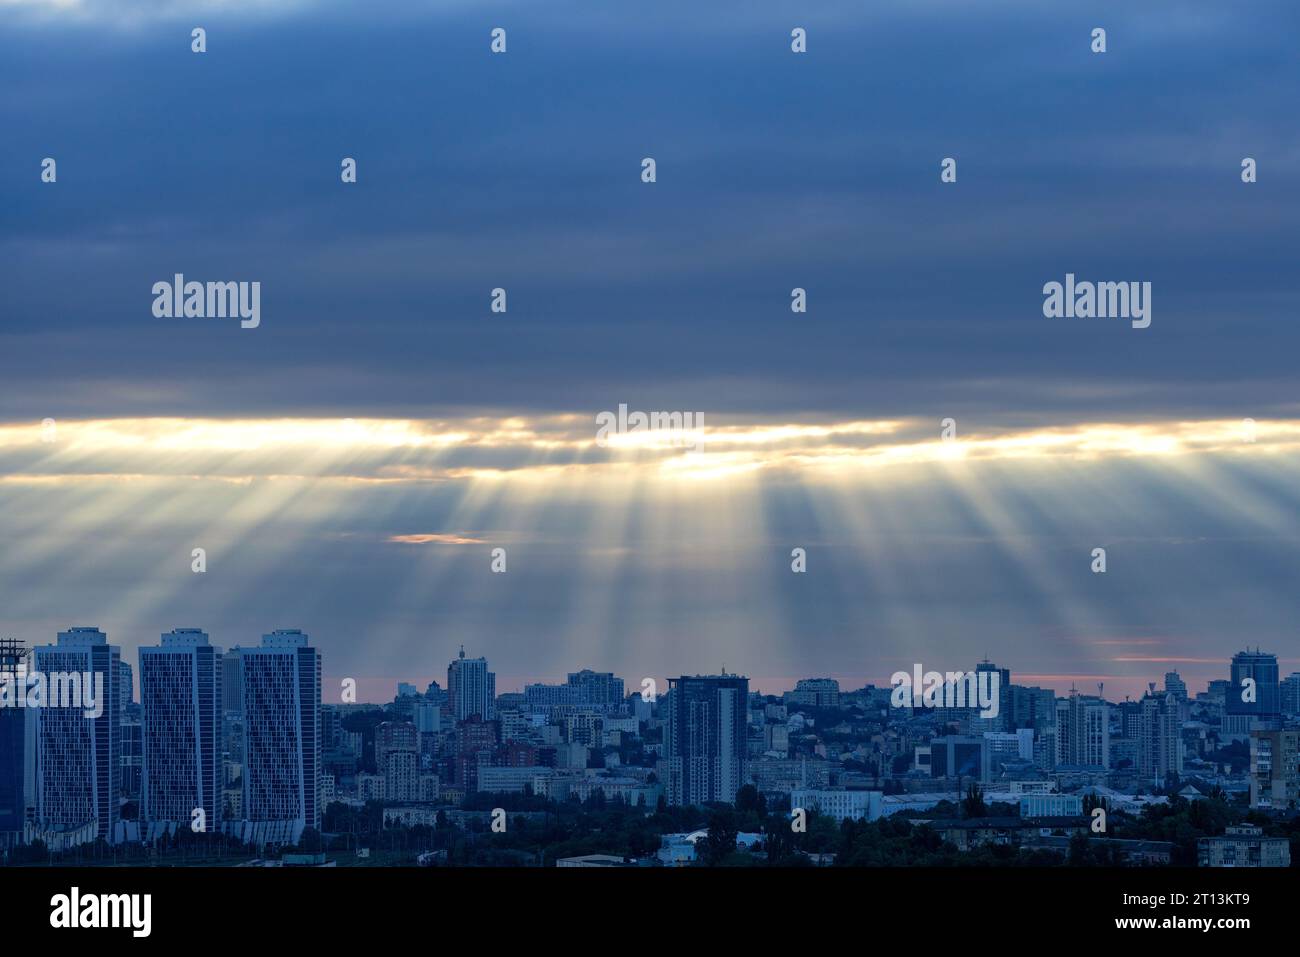 The sun's rays at dawn in the blue break through the thick clouds over the sleeping city. Shining light in a dramatic morning sky. Stock Photo